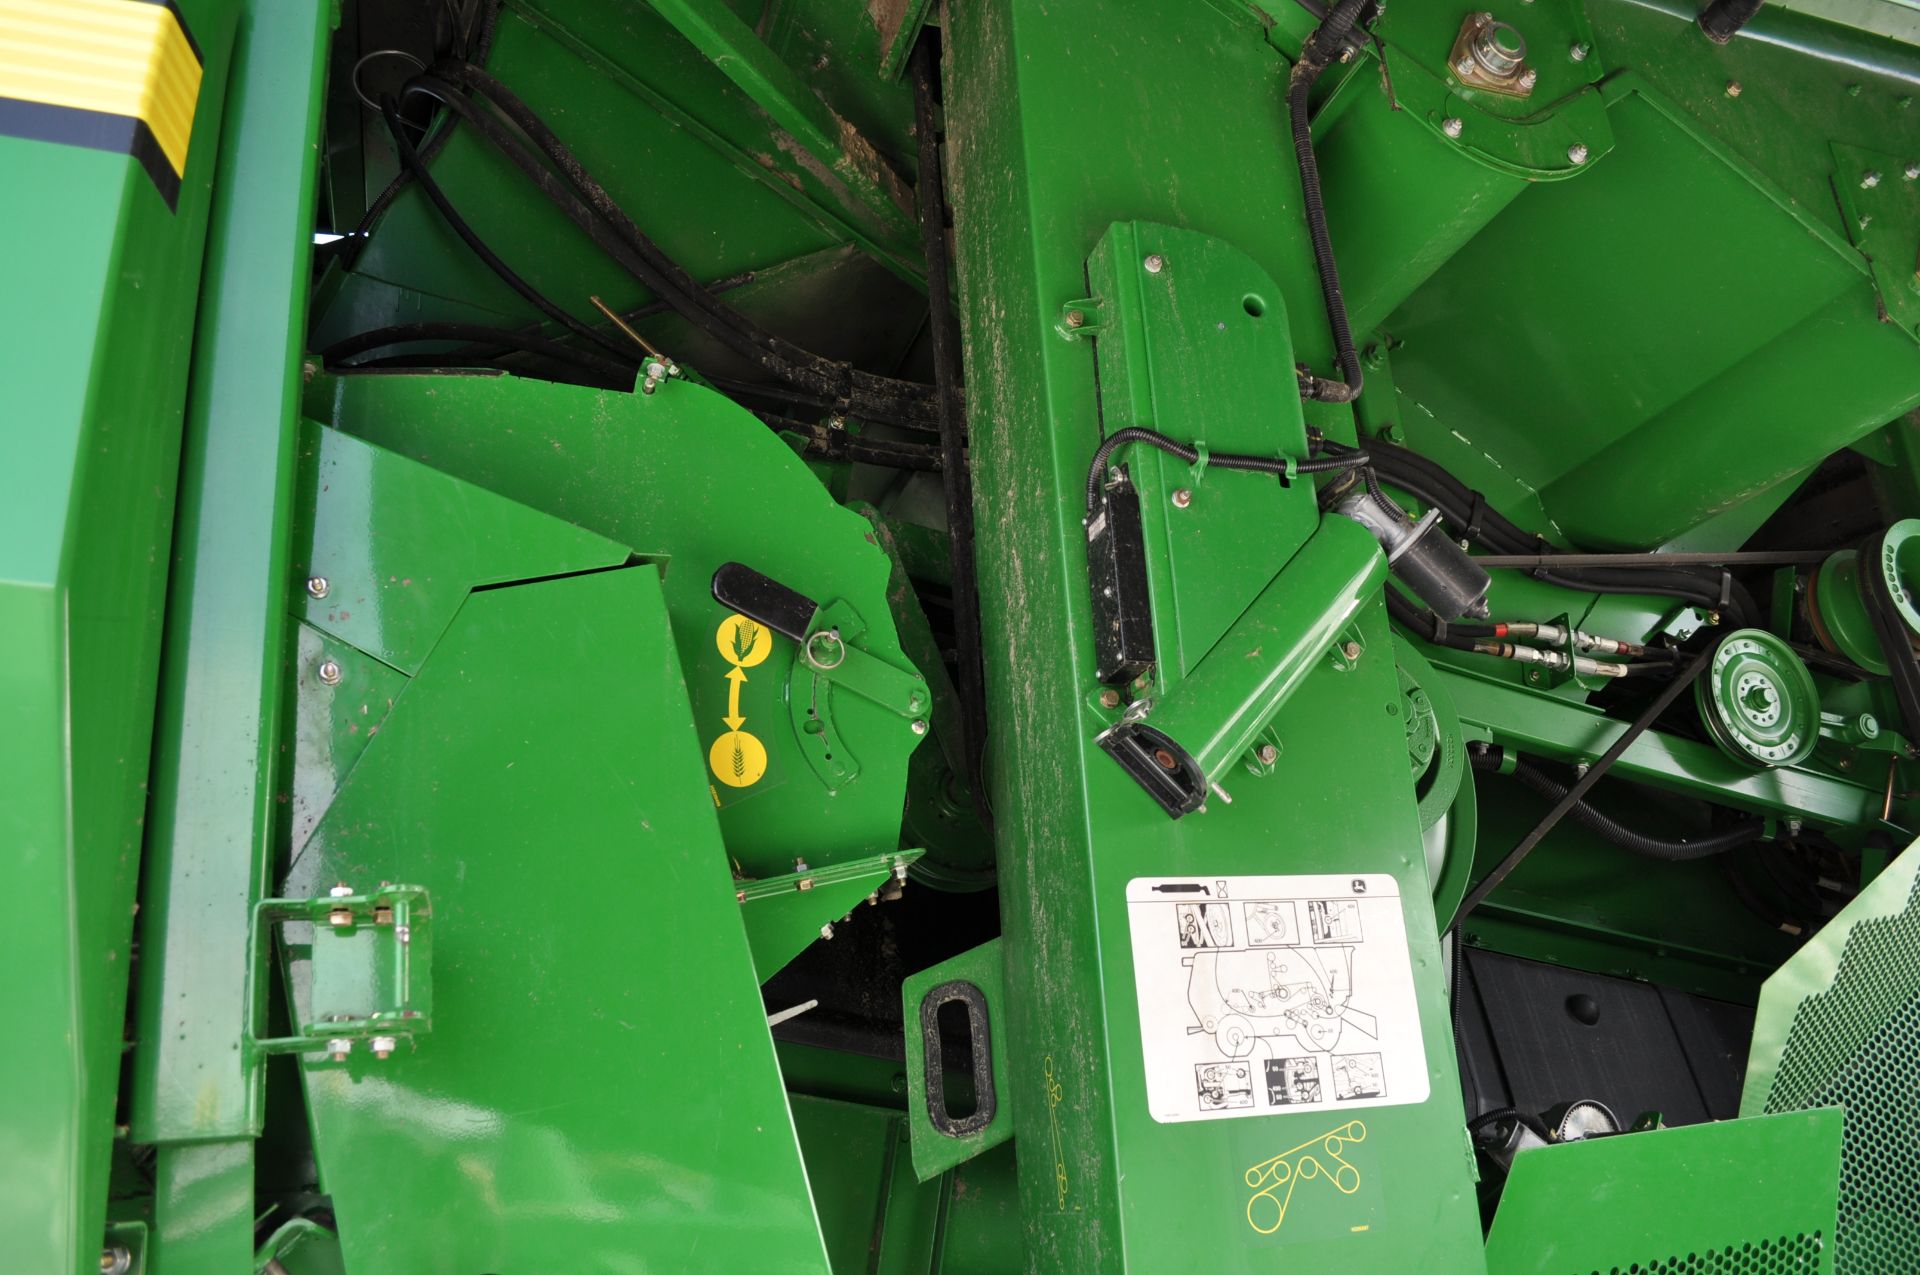 John Deere S680 combine, 1250/50R32 drive tires, 750/65R26 rear tires, PWRD, yield monitor, poly - Image 28 of 41